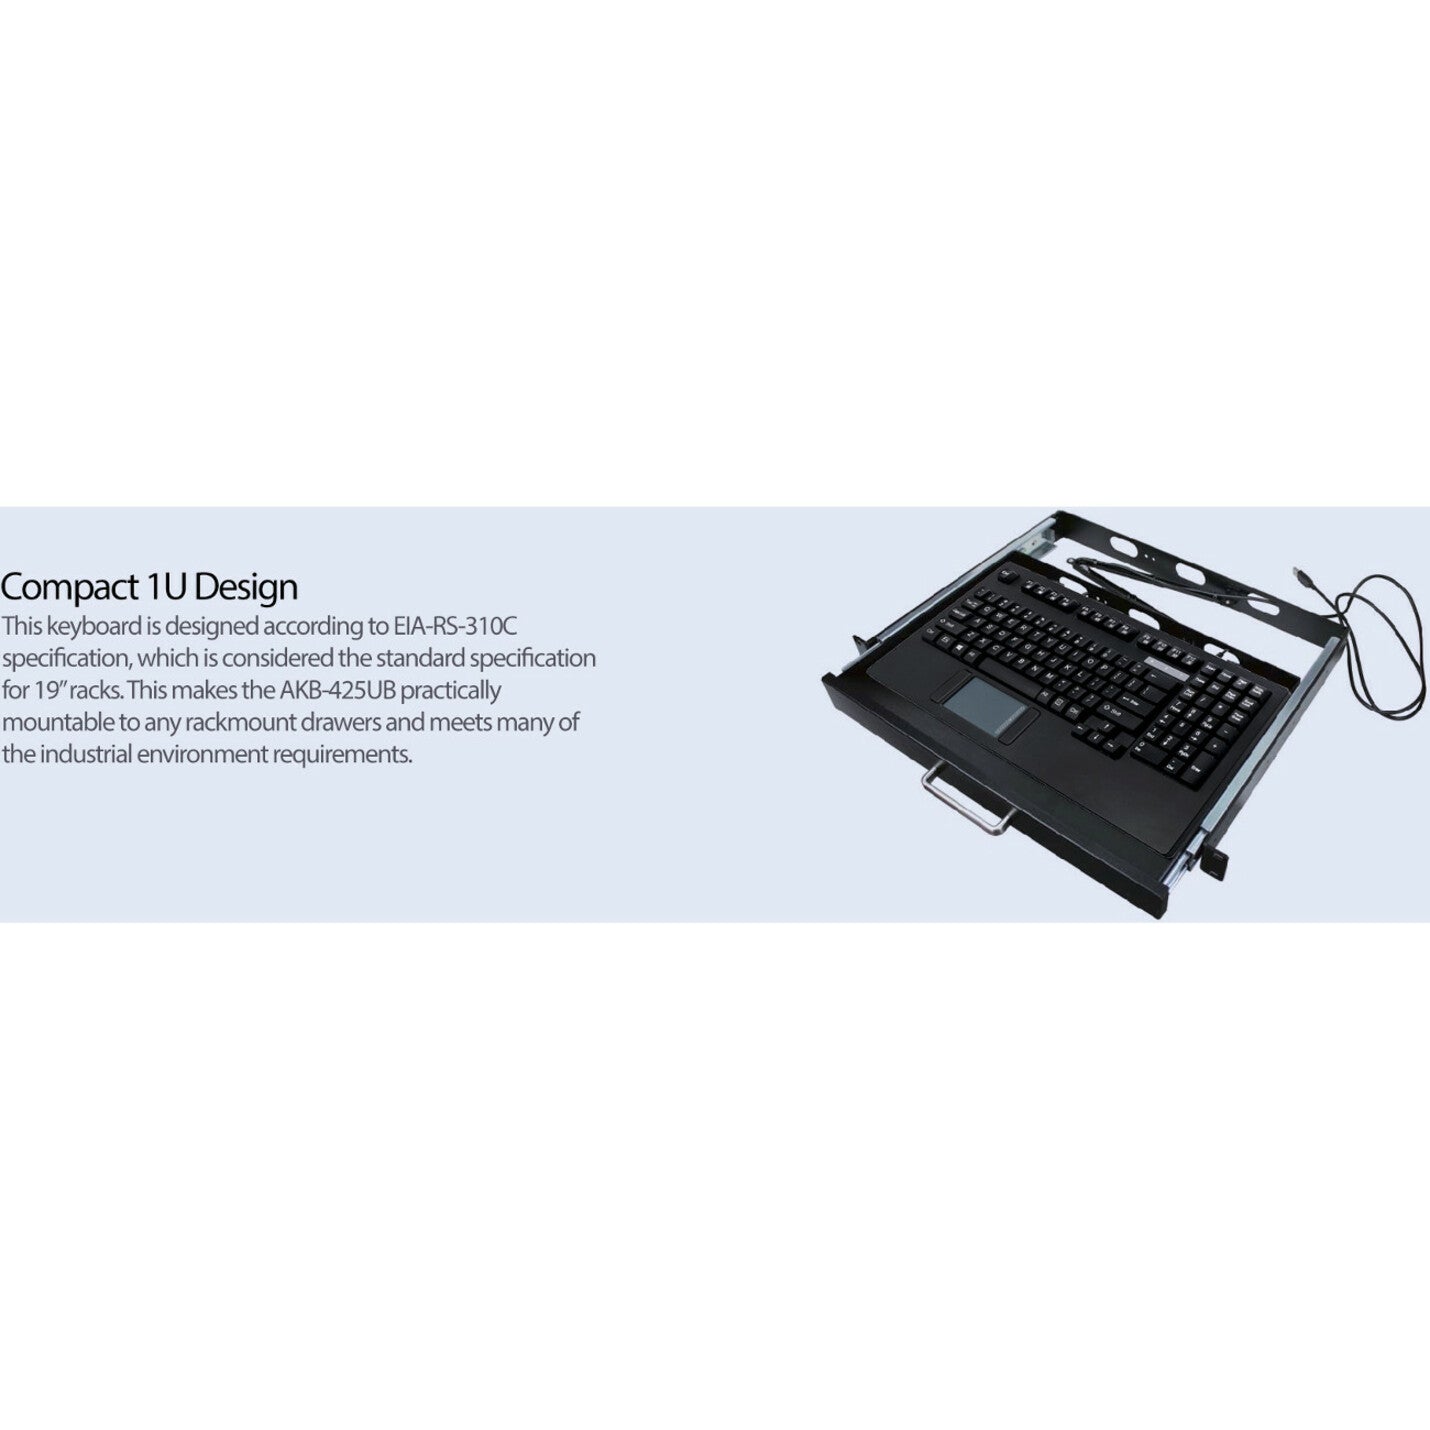 Adesso AKB-425UB EasyTouch Rackmount Touchpad Keyboard, USB Cable, 104 Keys, Quiet and Compact